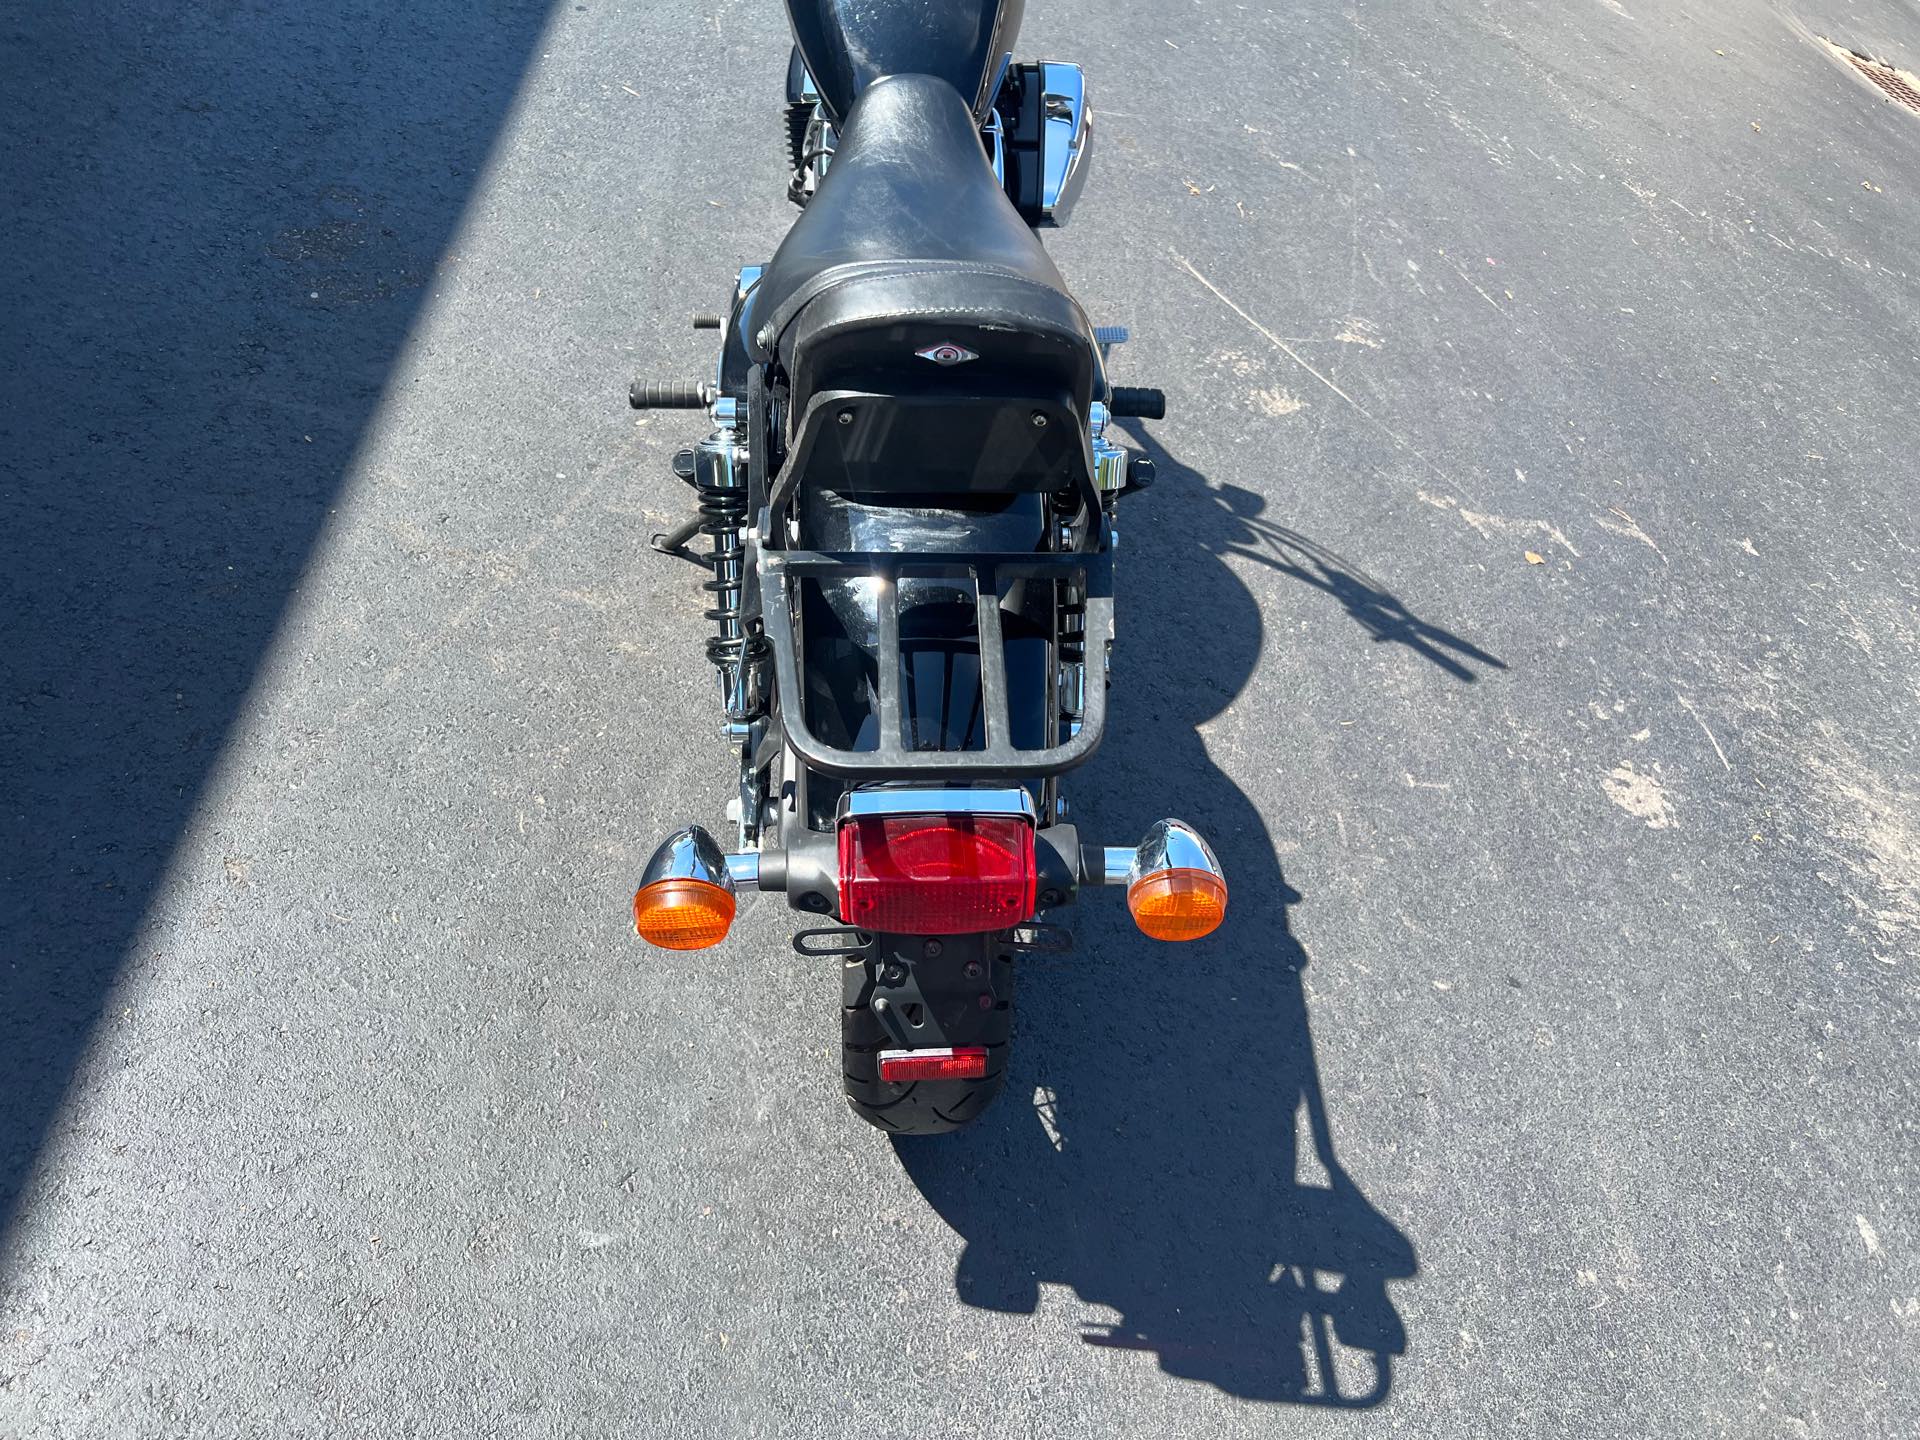 2013 Honda Shadow RS at Aces Motorcycles - Fort Collins